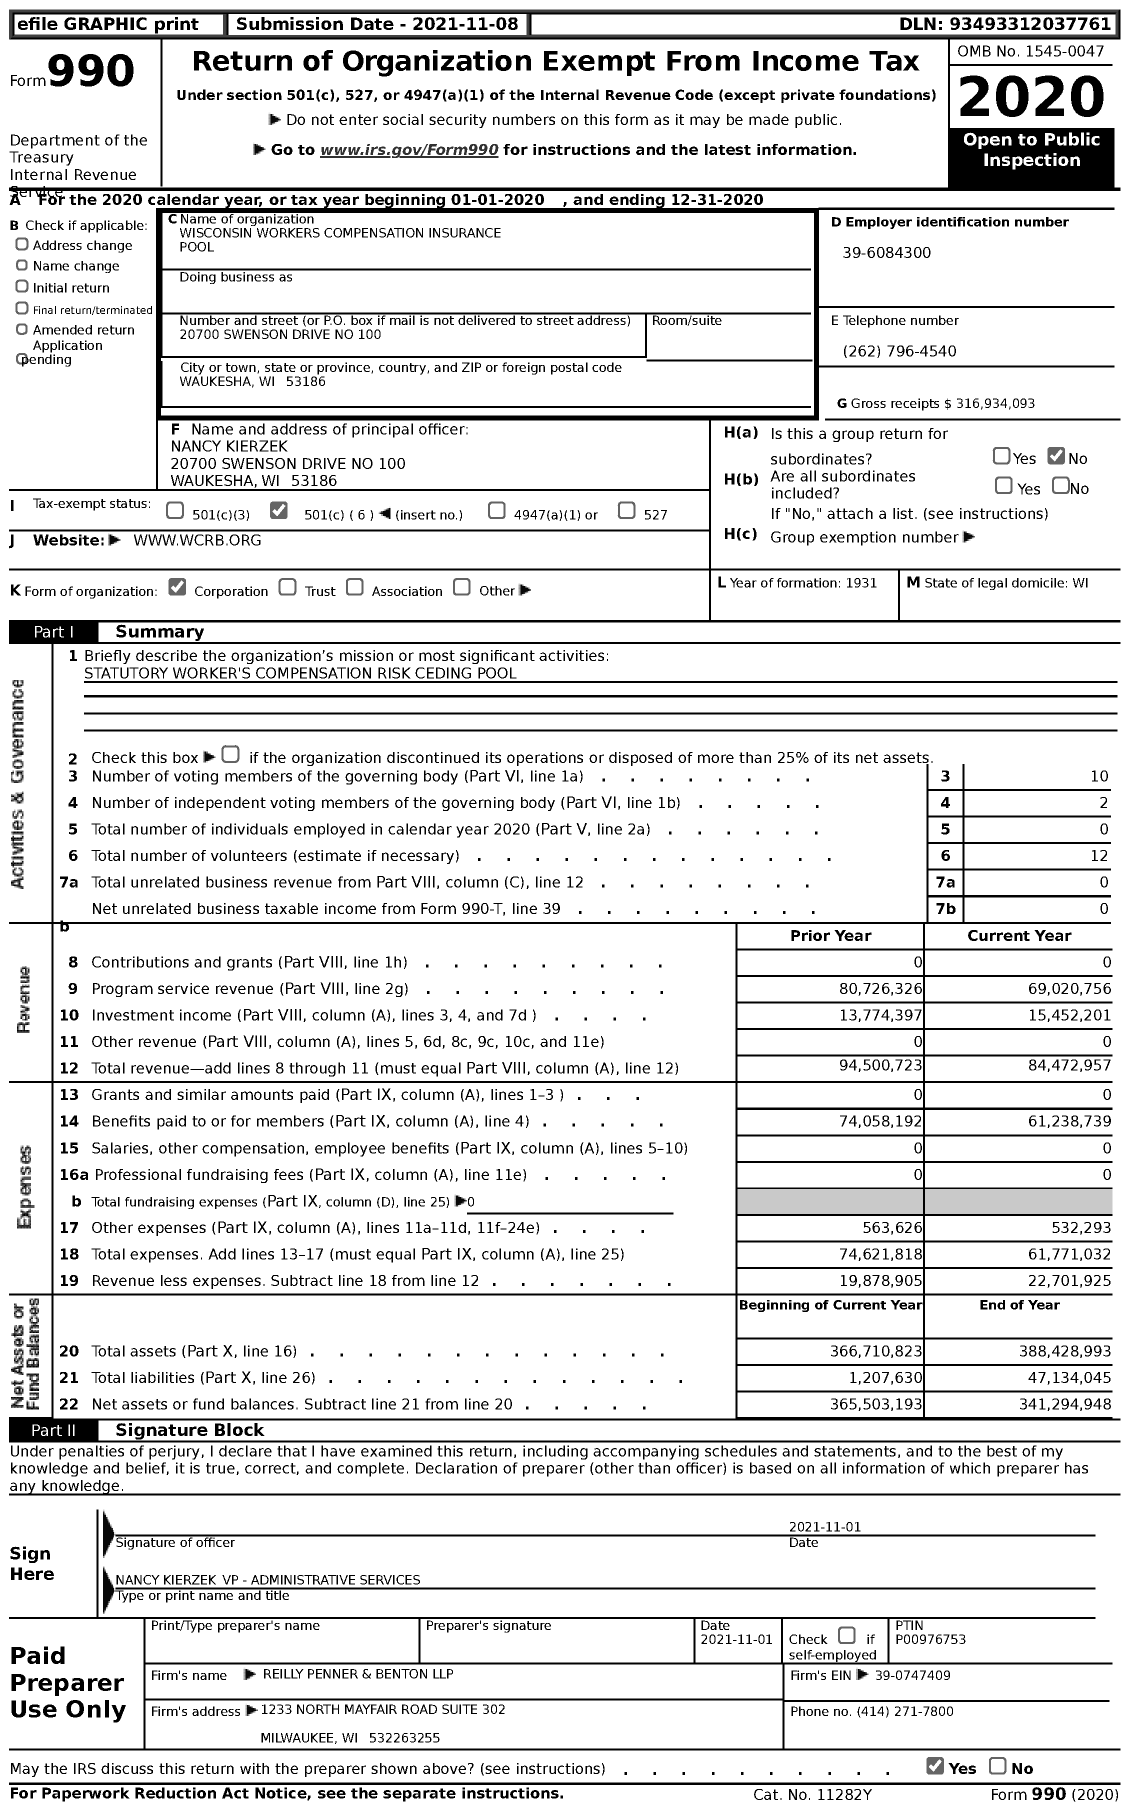 Image of first page of 2020 Form 990 for Wisconsin Workers Compensation Insurance Pool (WCRB)